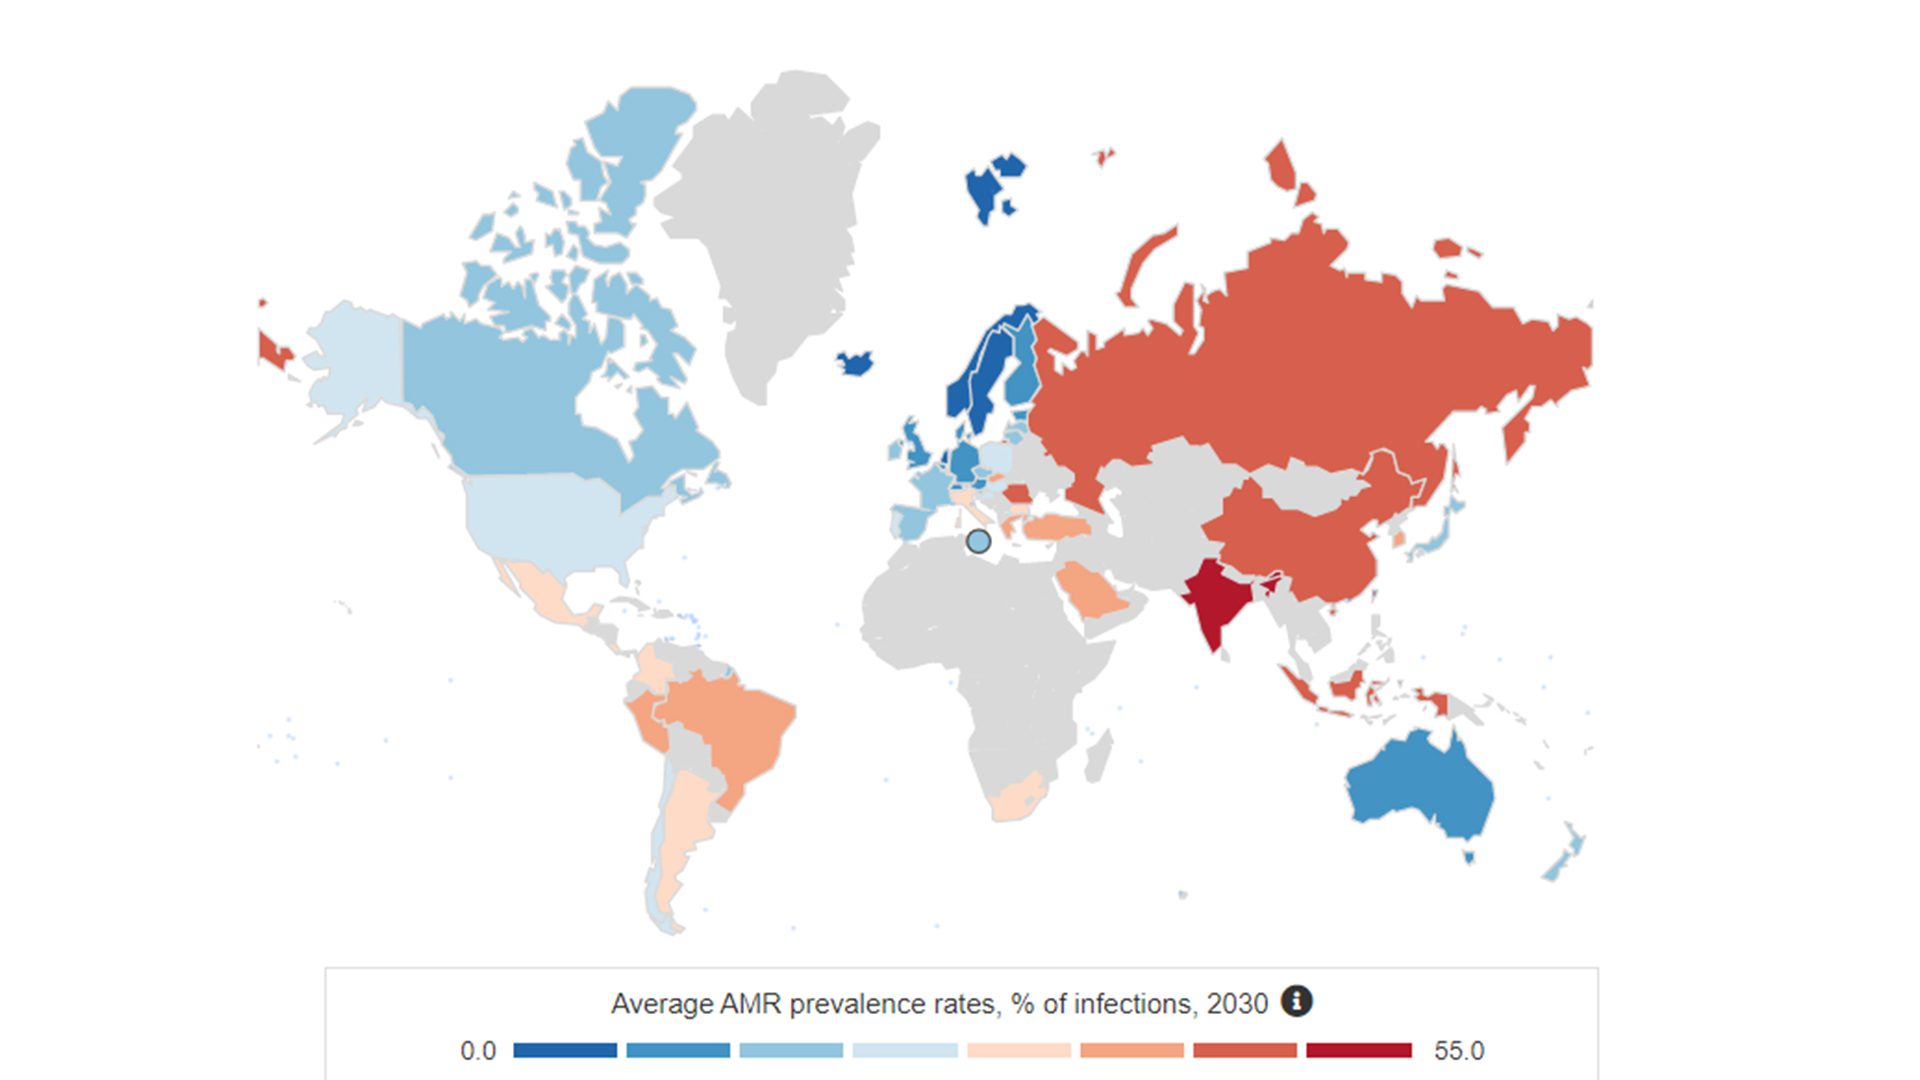 OECD projected global average antimicrobial resistance prevalence rates by 2030 [2]